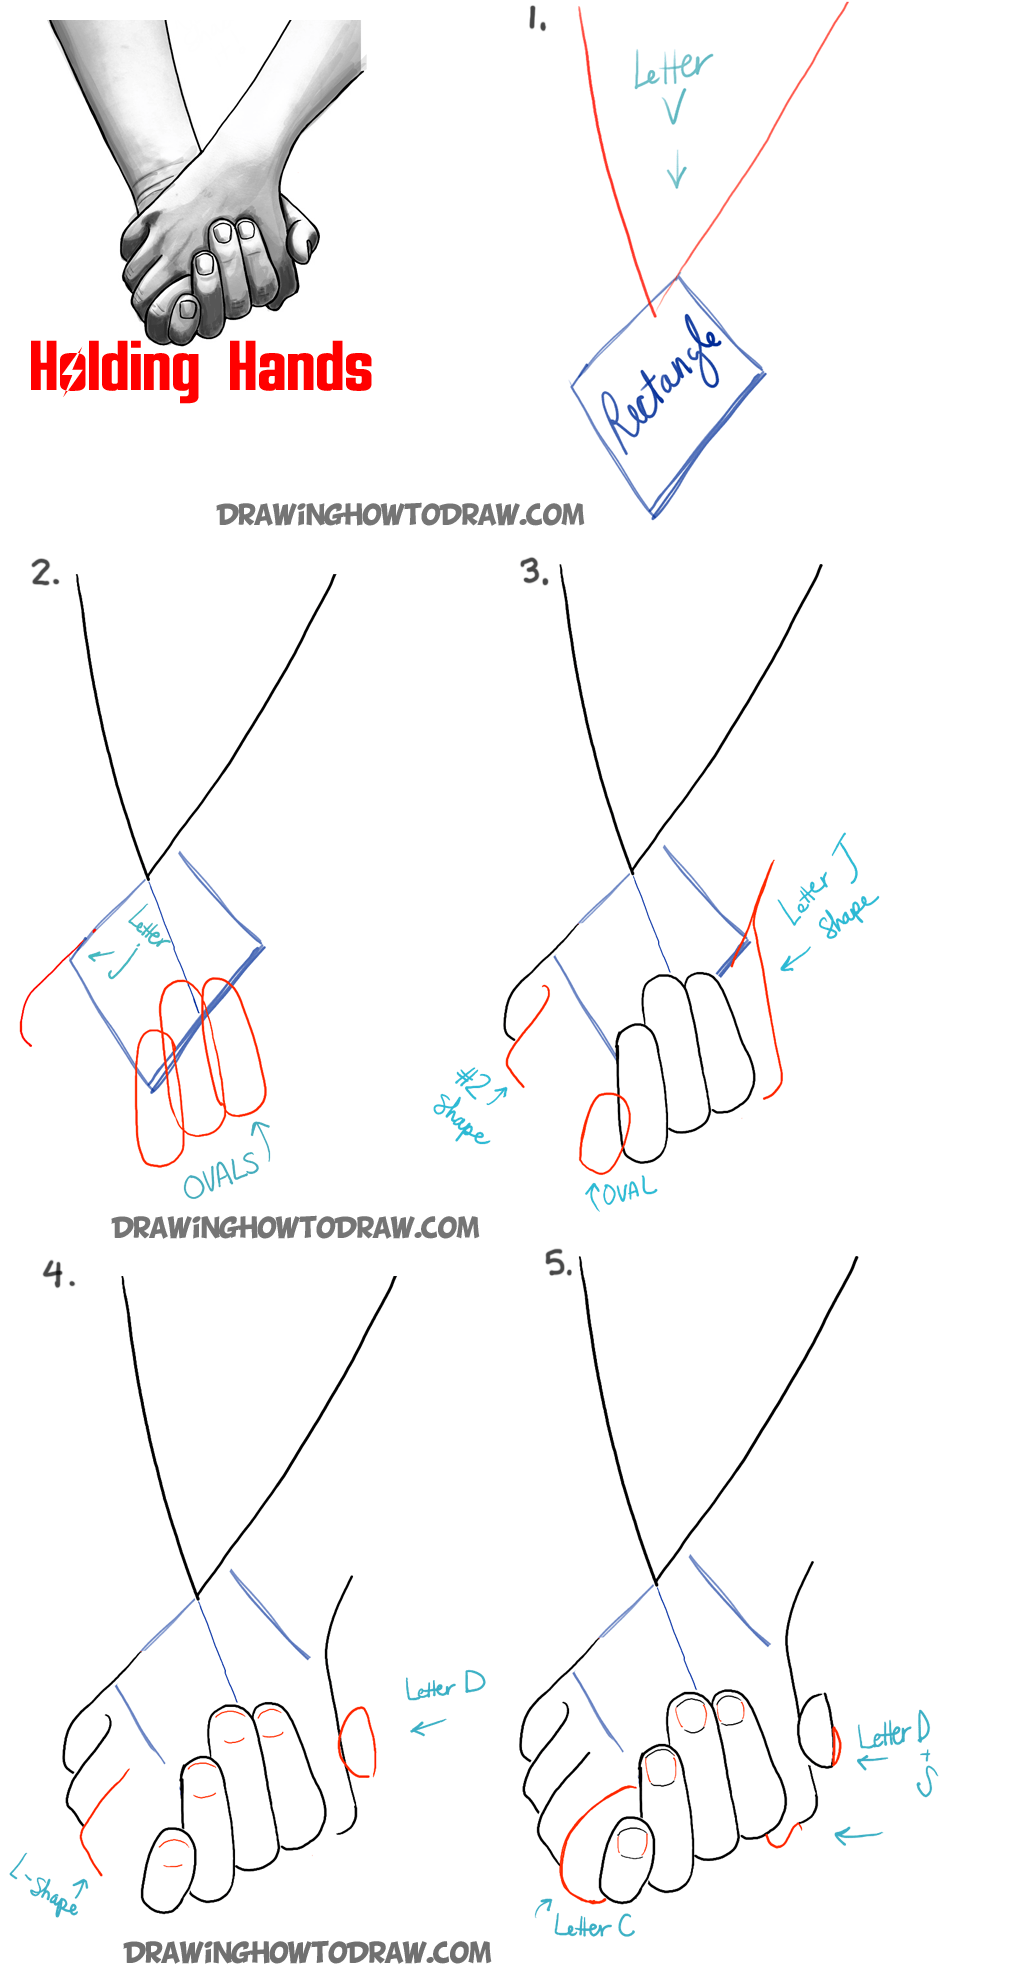 How to Draw Holding Hands with Easy Step by Step Drawing Tutorial - How to Draw Step by Step Drawing Tutorials